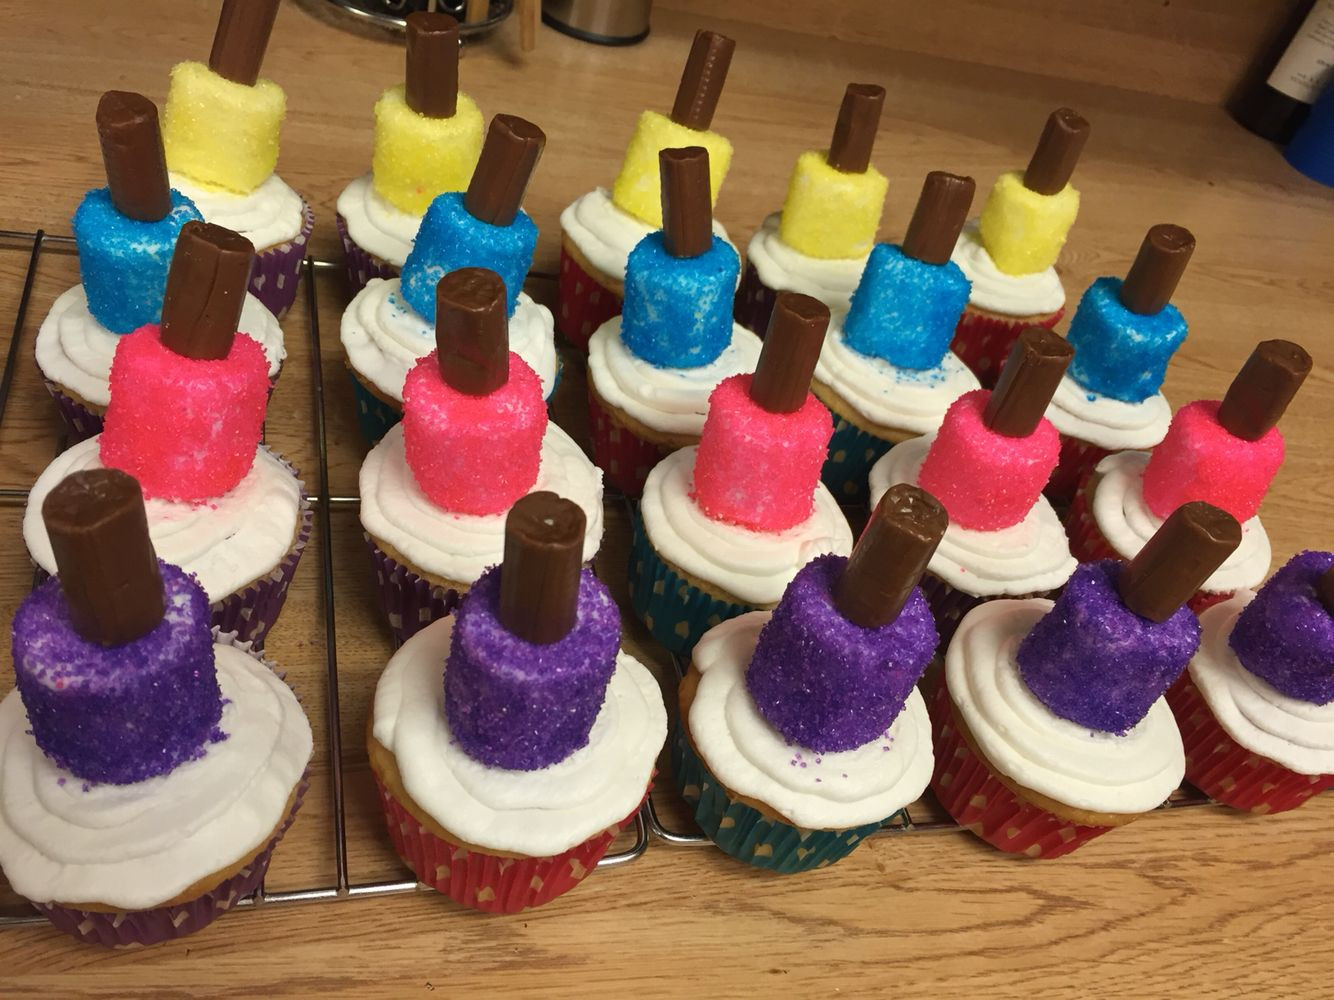 Birthday Party Ideas For 8 Year Old Girl
 Nail polish bottle cupcakes 8 year old girl birthday